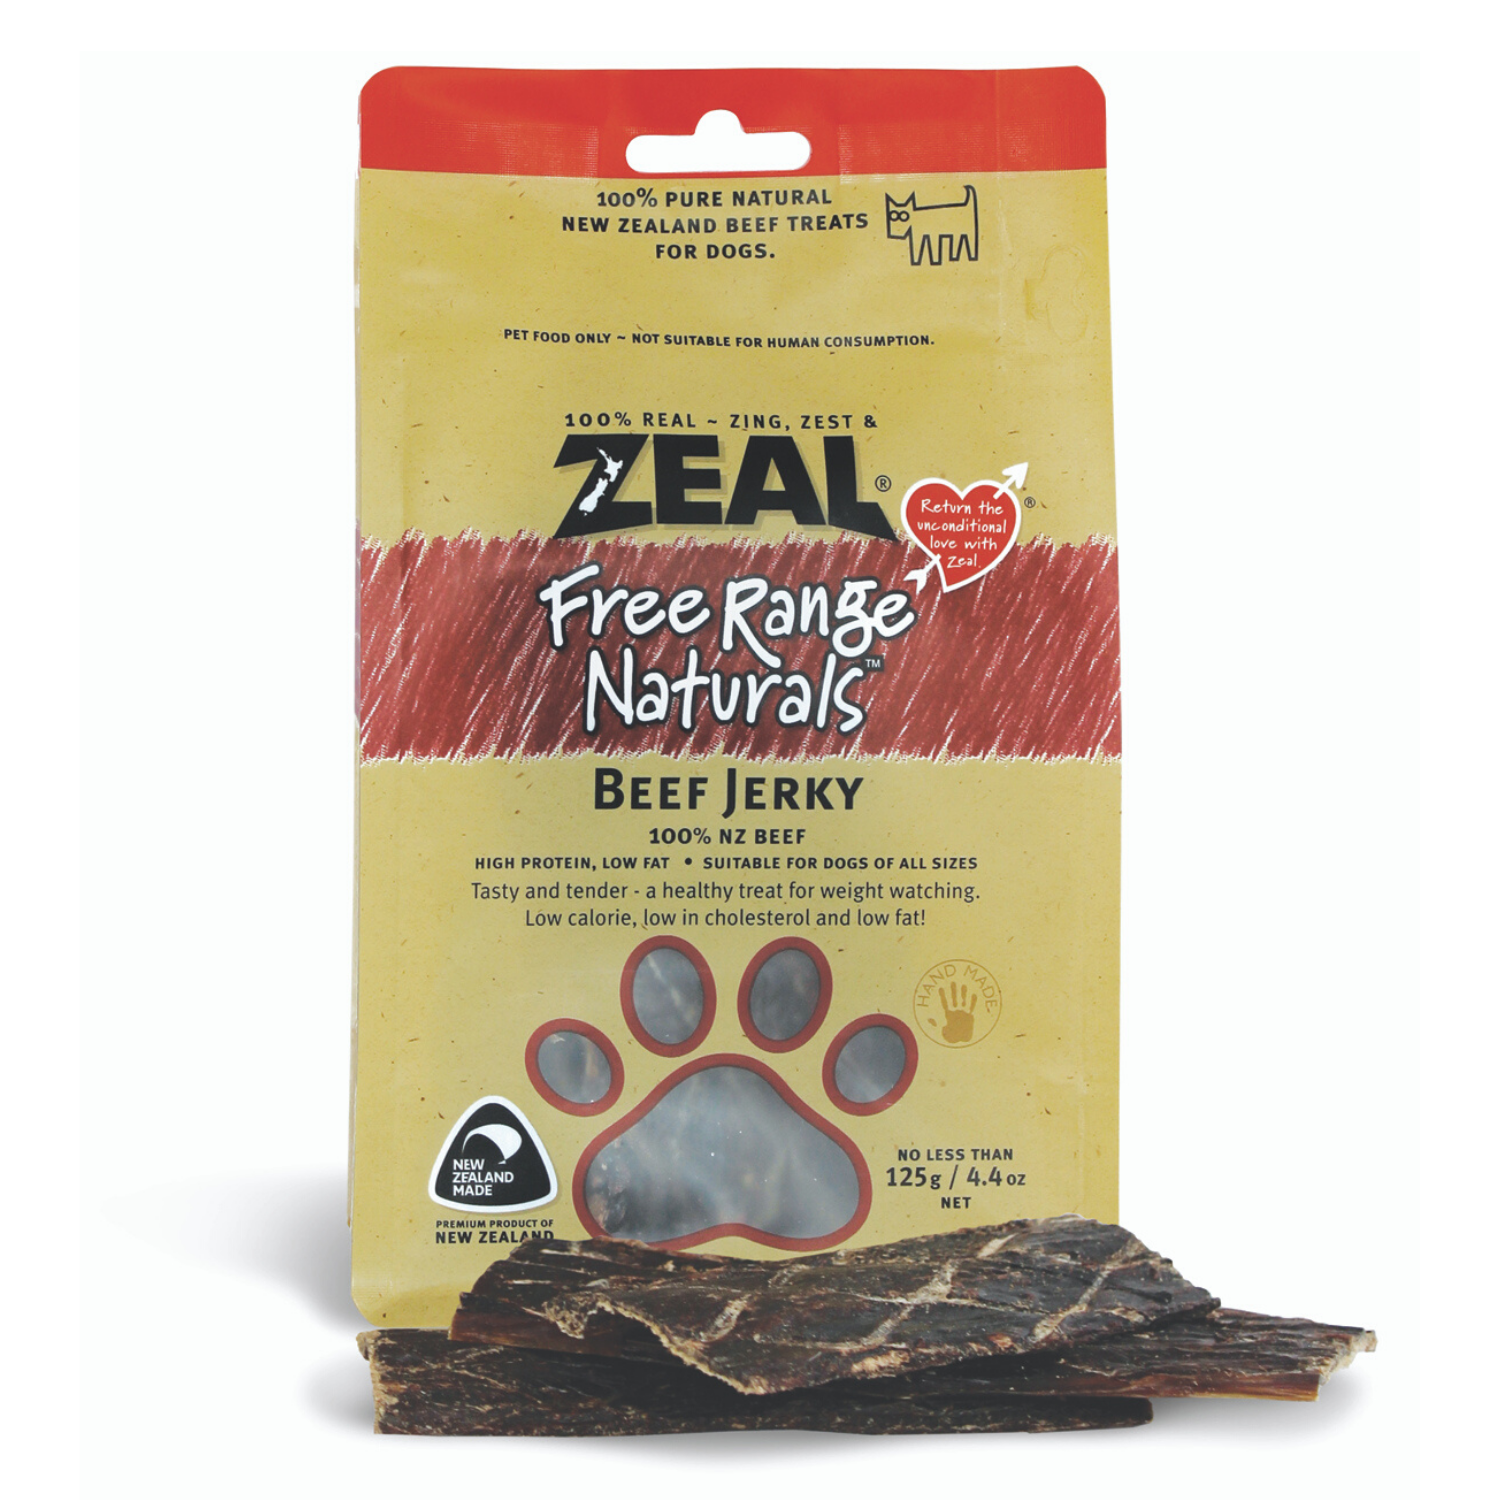 [DISCONTINUED] Zeal Free Range Naturals Beef Jerky / Fillets - 125g (BUY 2 GET 1 FREE)